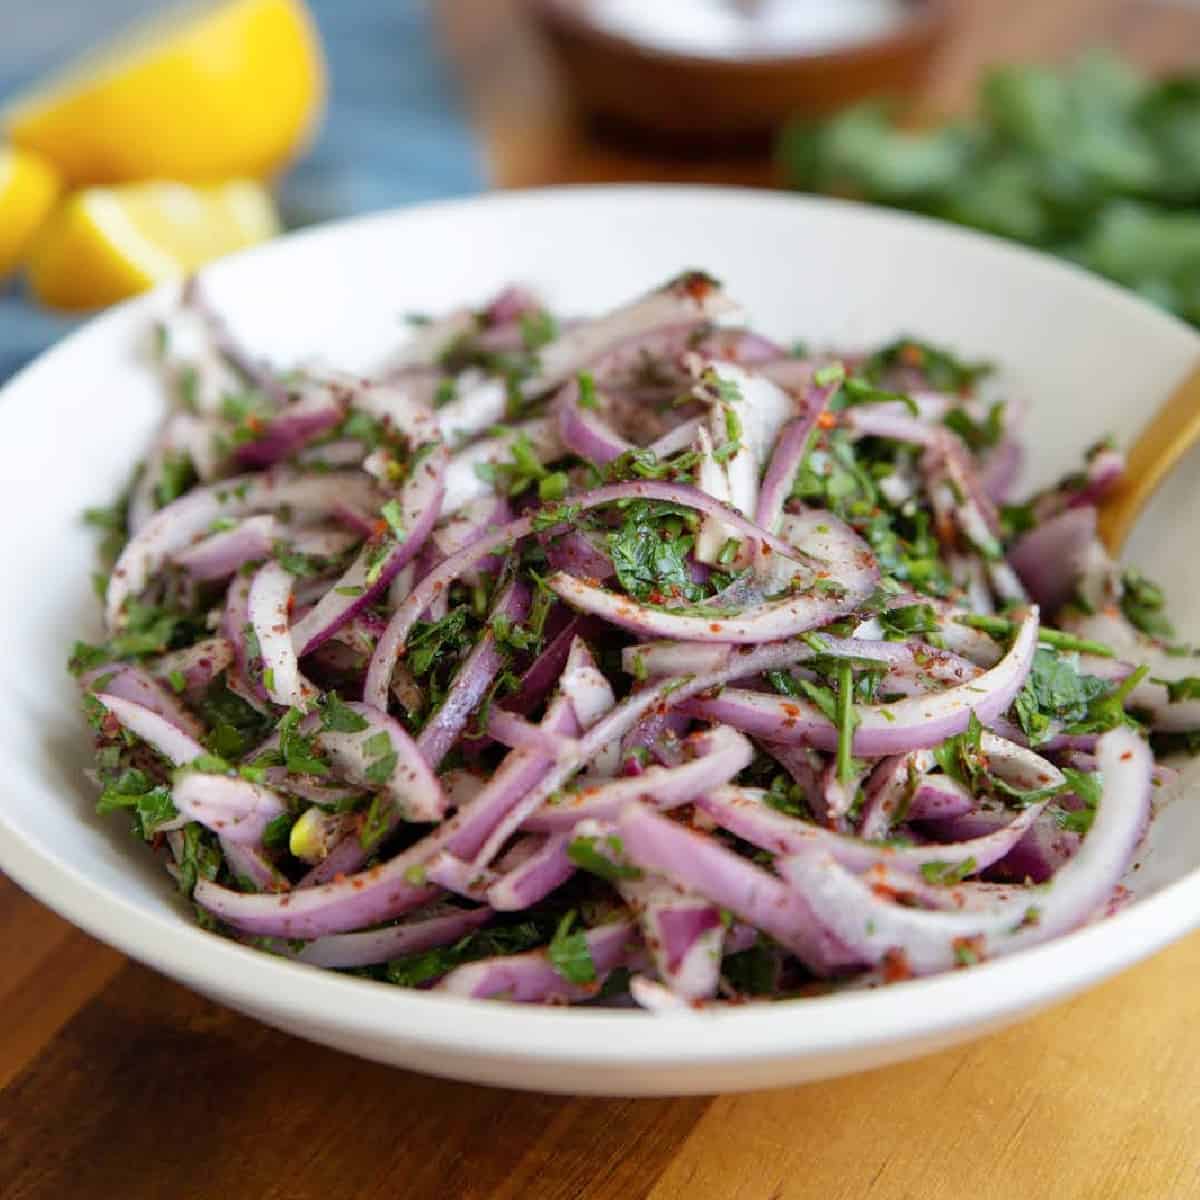 Turkish sumac onions are ready in 10 minutes and make an ideal companion to a wide variety of dishes. Crispy red onions are marinated with lemon juice, sumac and herbs - all you need to add a lot of bright flavors to any dish!
